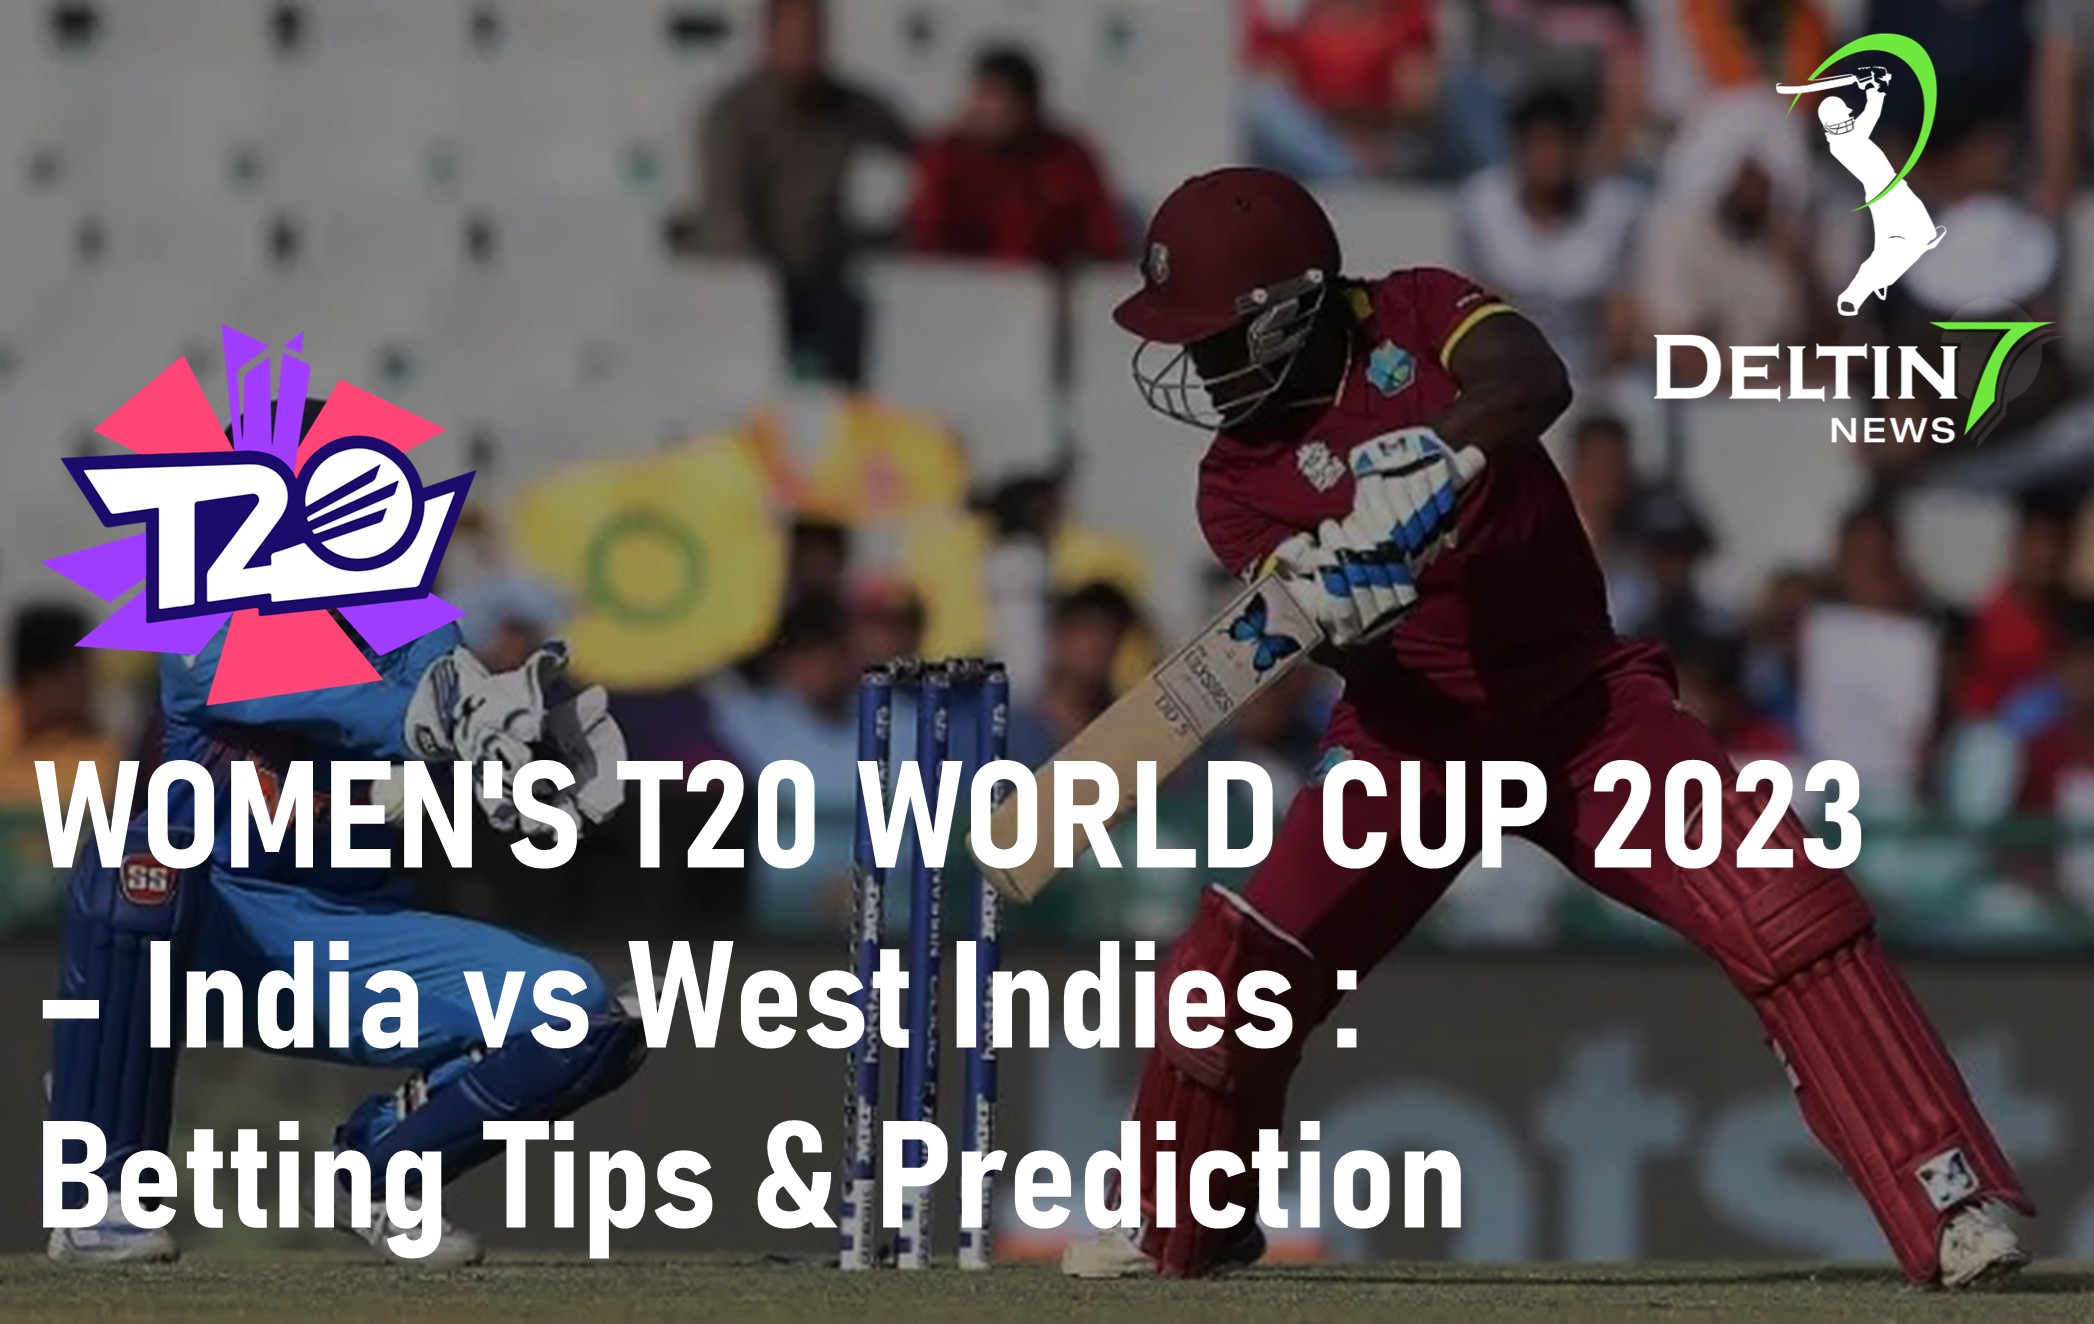 Women's T20 WORLD CUP 2023 India vs West Indies